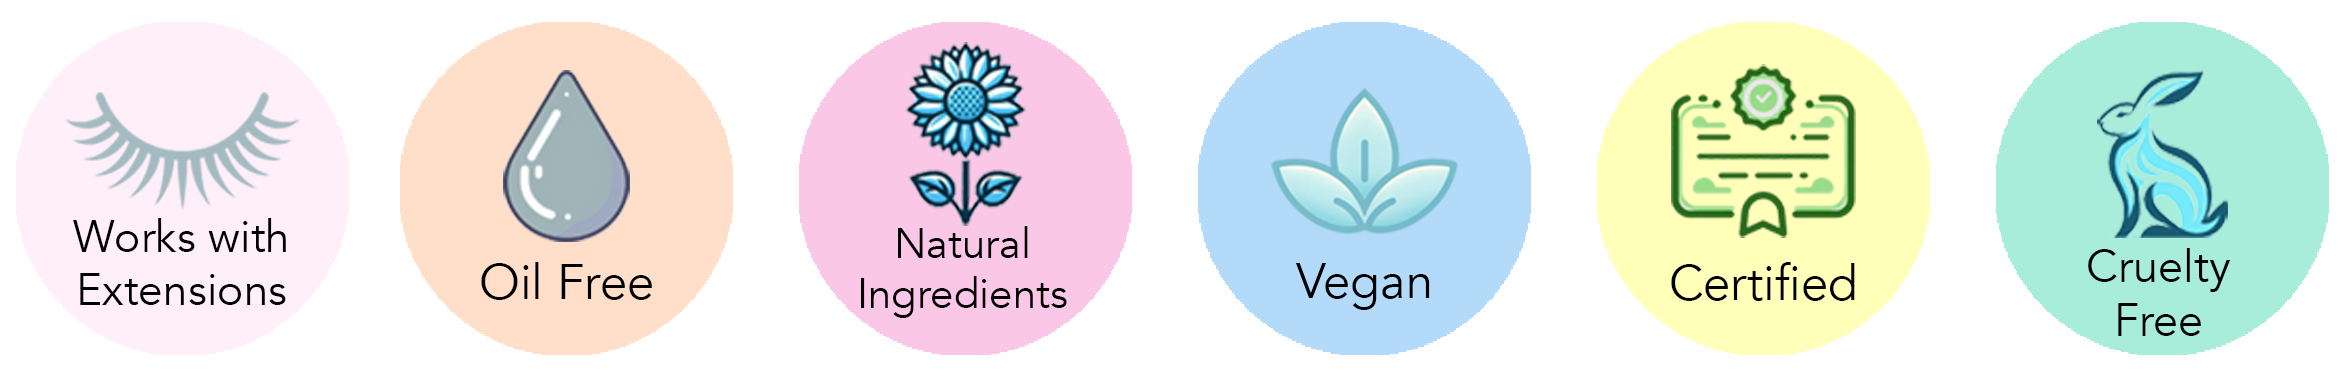 Round icons in various colors representing benefits: Works with Extensions, Oil-Free, Natural, Vegan, Certified, and Cruelty-Free